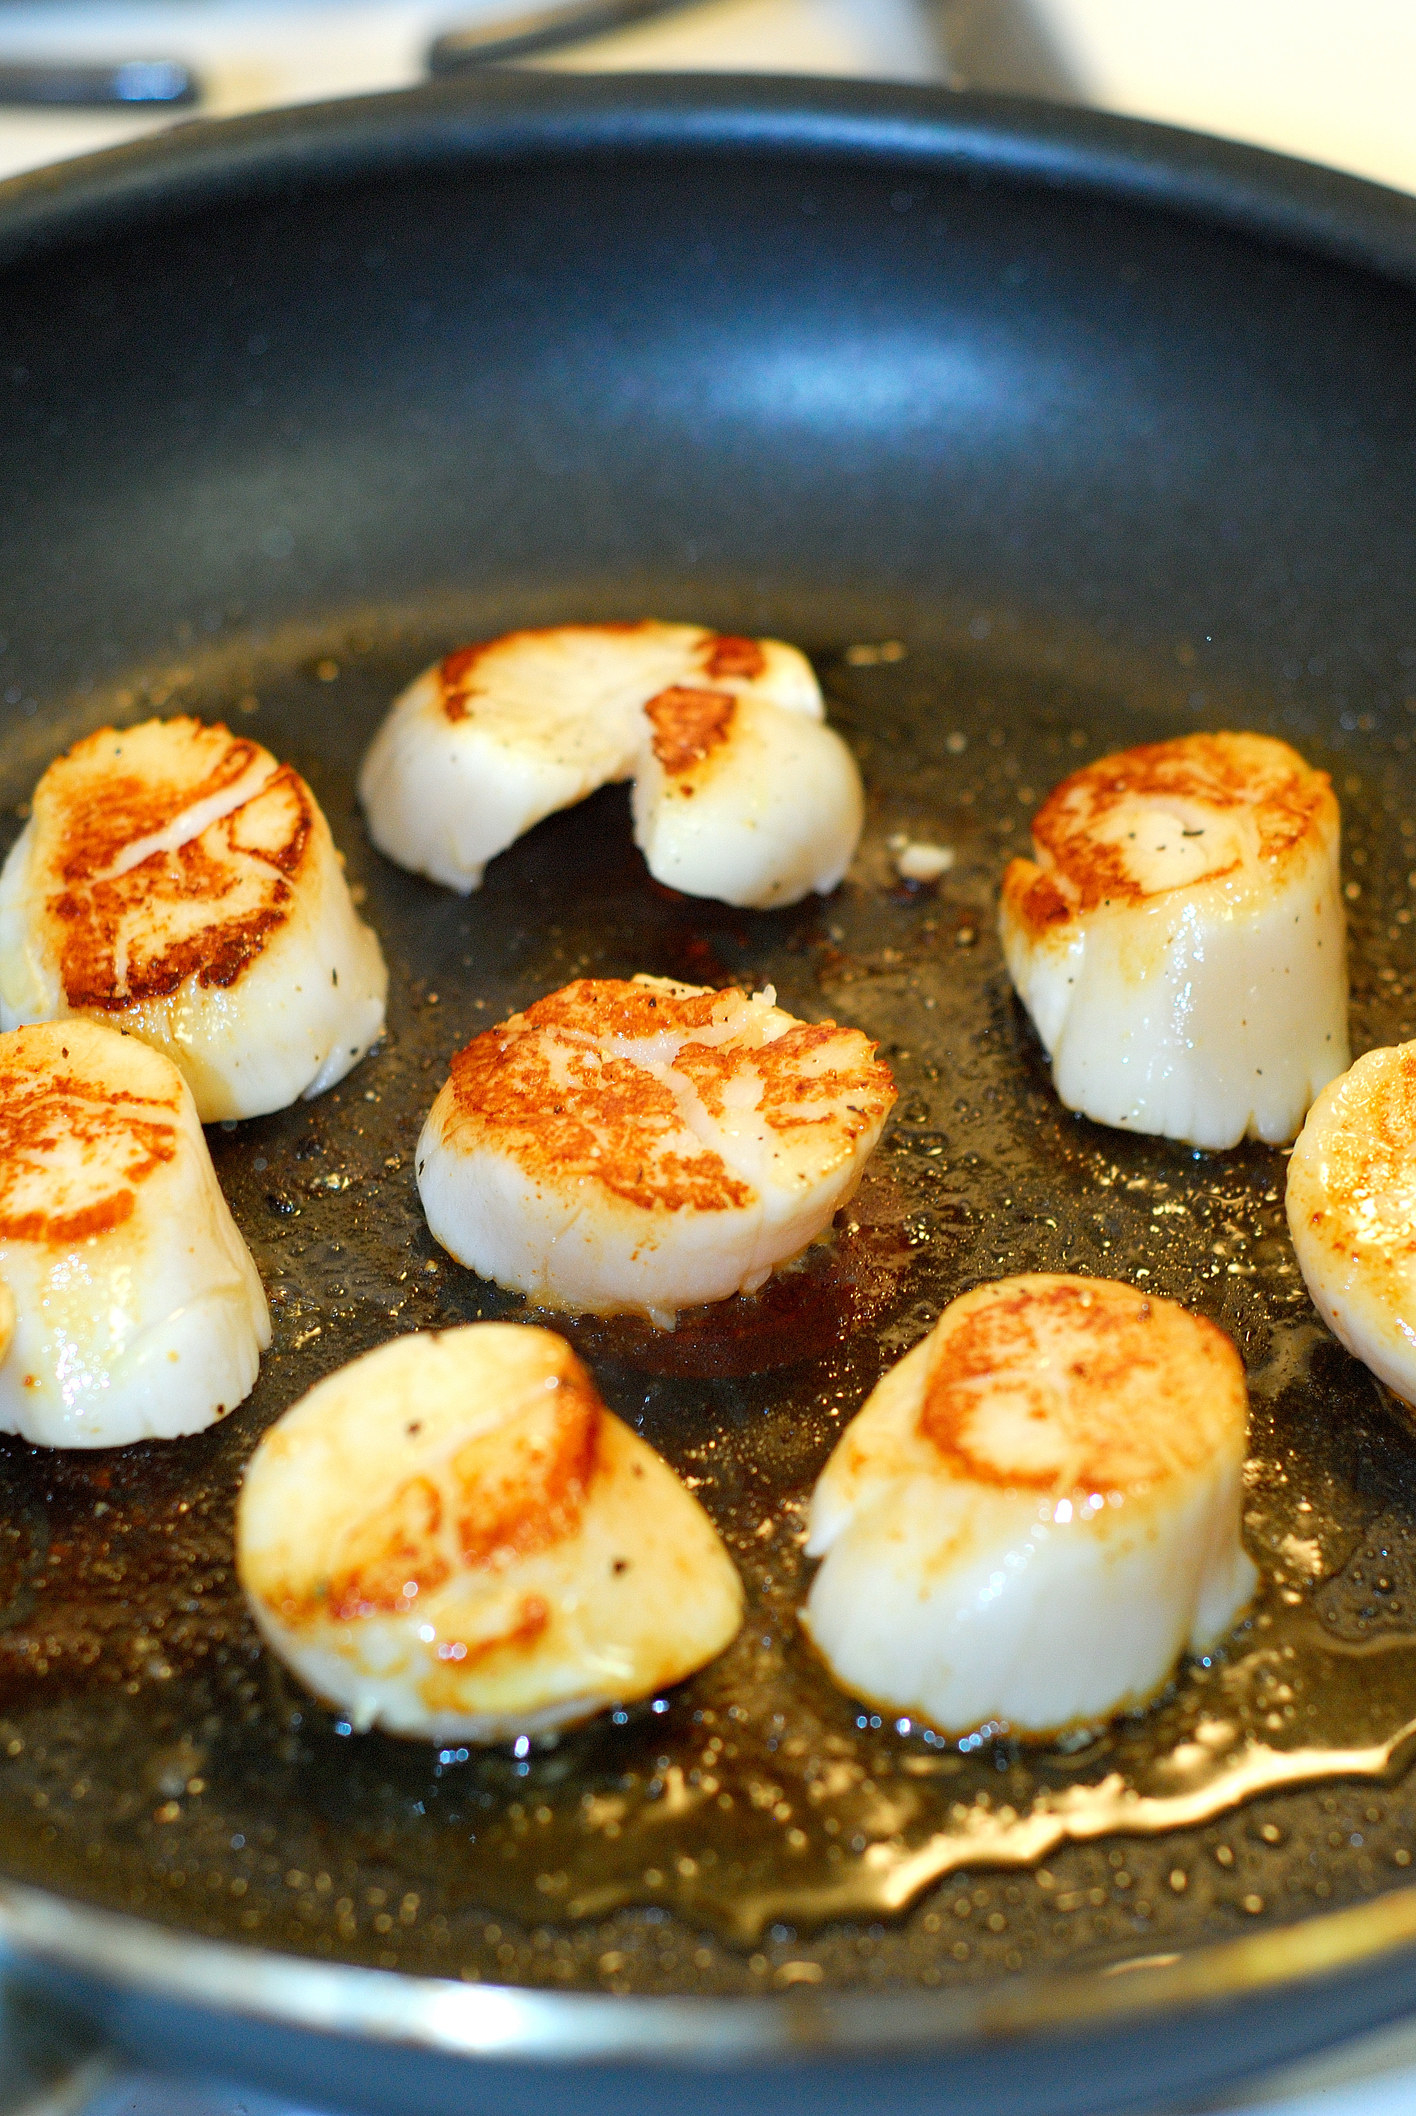 Scallops cooking in a skillet.